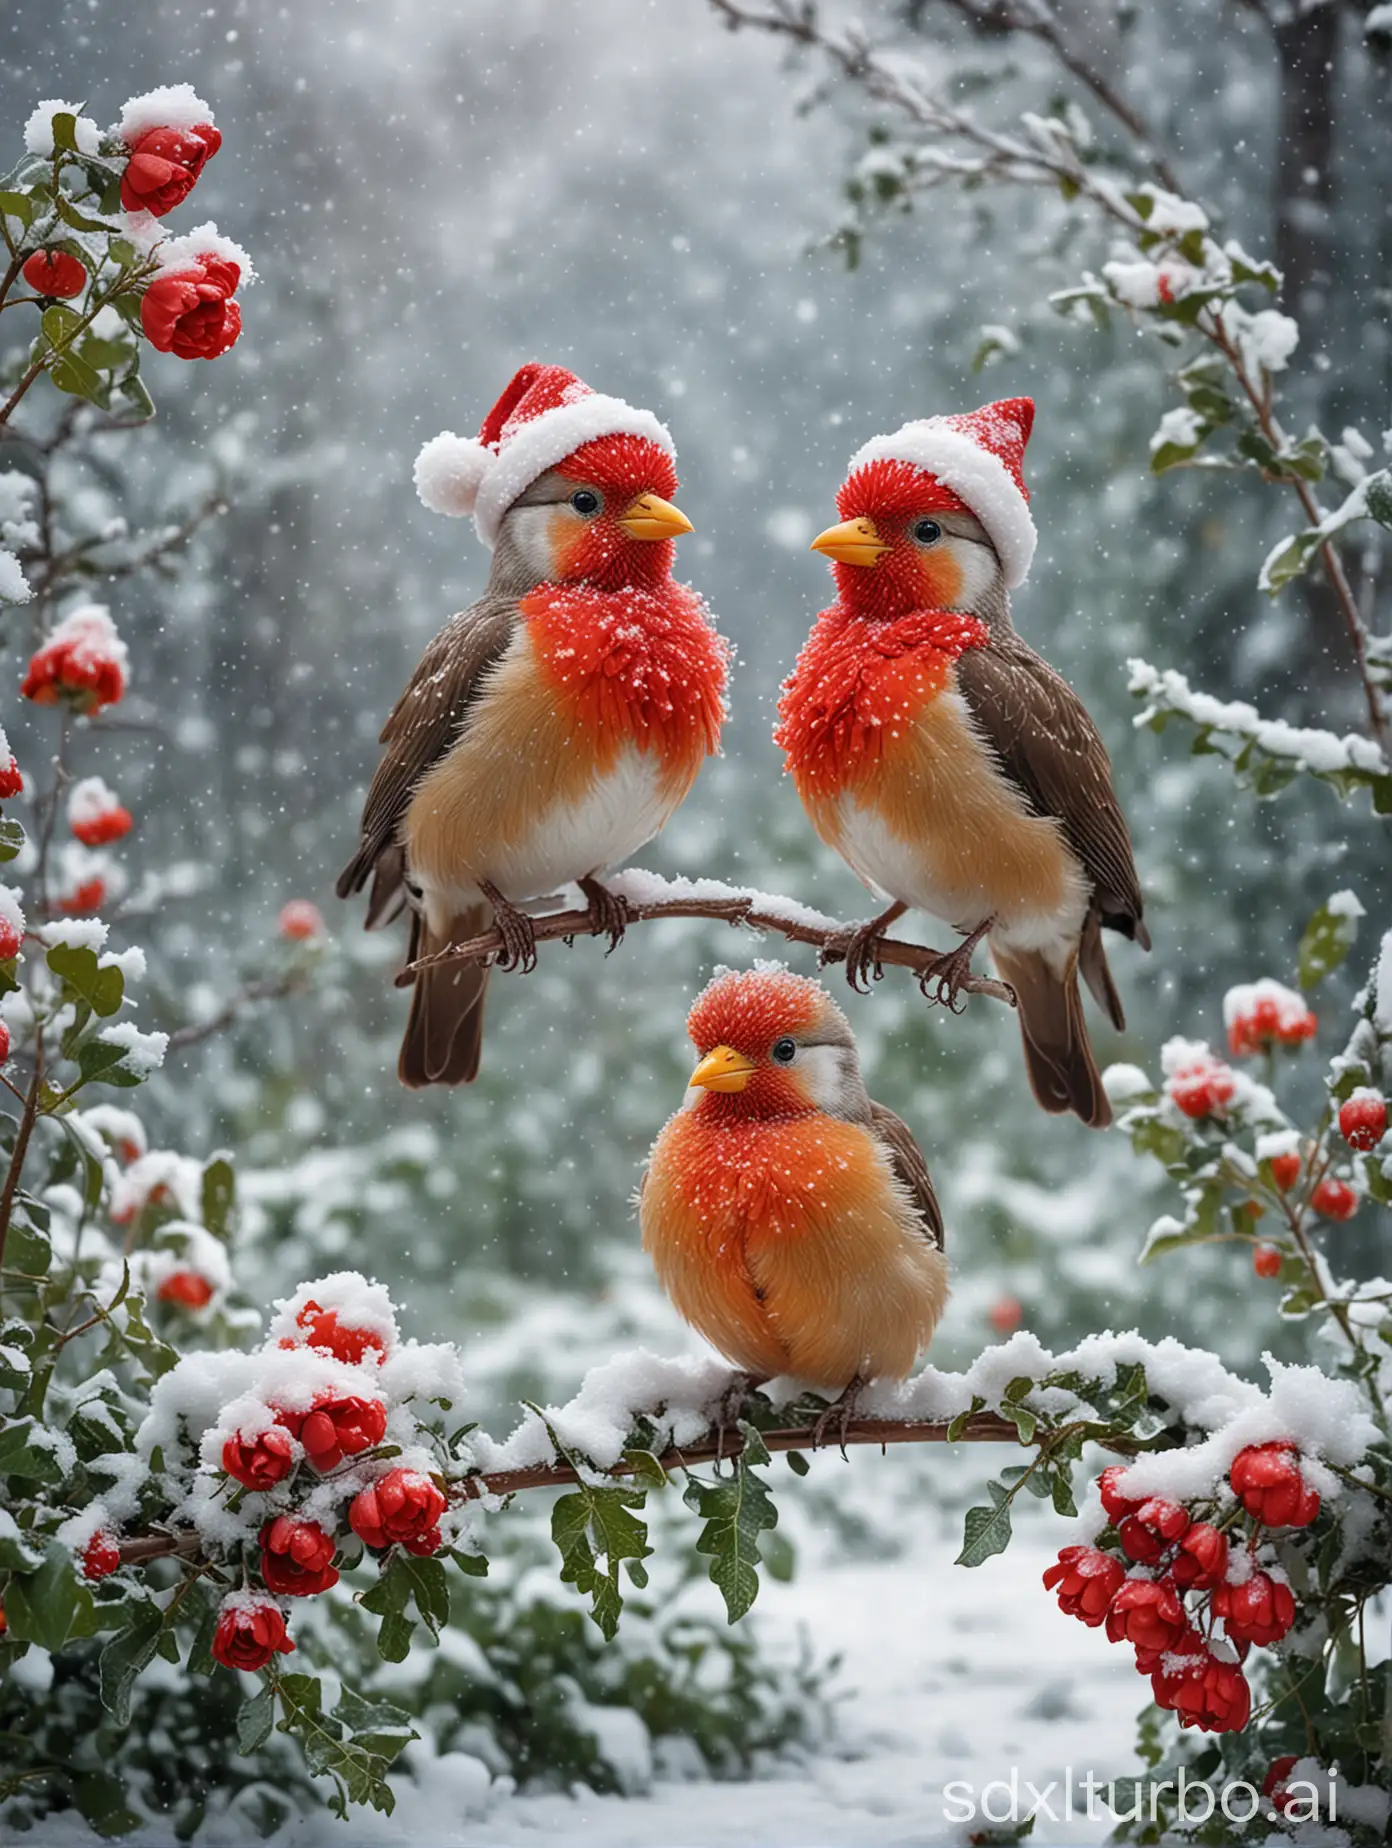 Colorful-Birds-in-Winter-Wonderland-with-Red-Knitted-Scarf-and-Santa-Hat